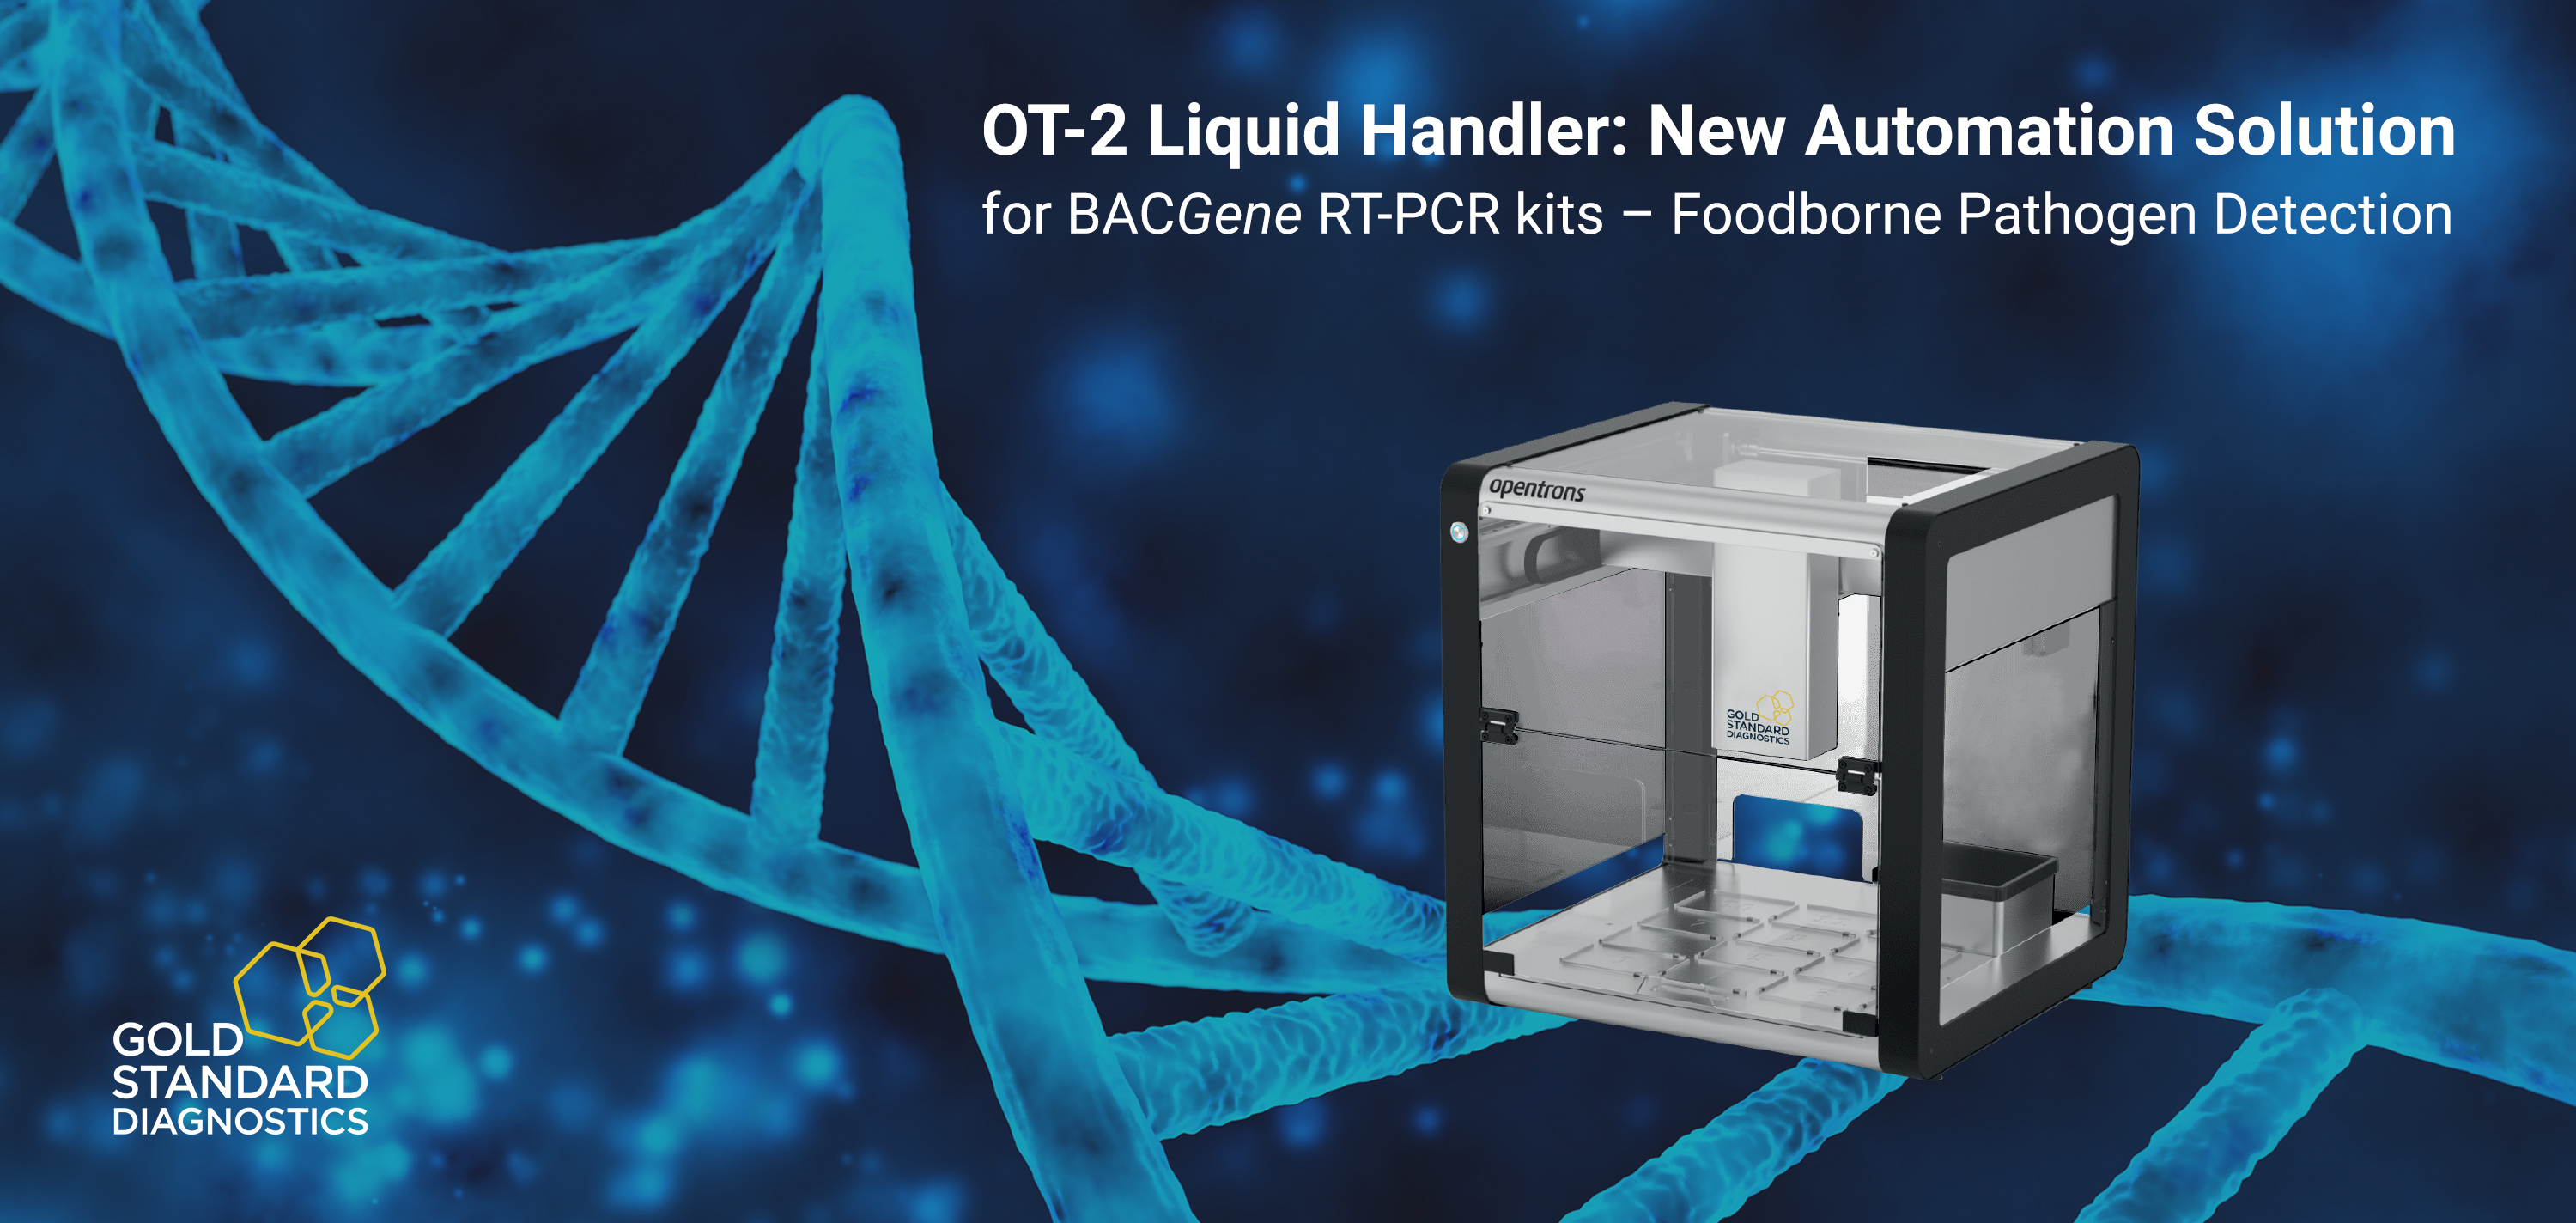 OT-2 Liquid Handler: New Automation Solution for BACGene real-time PCR kits